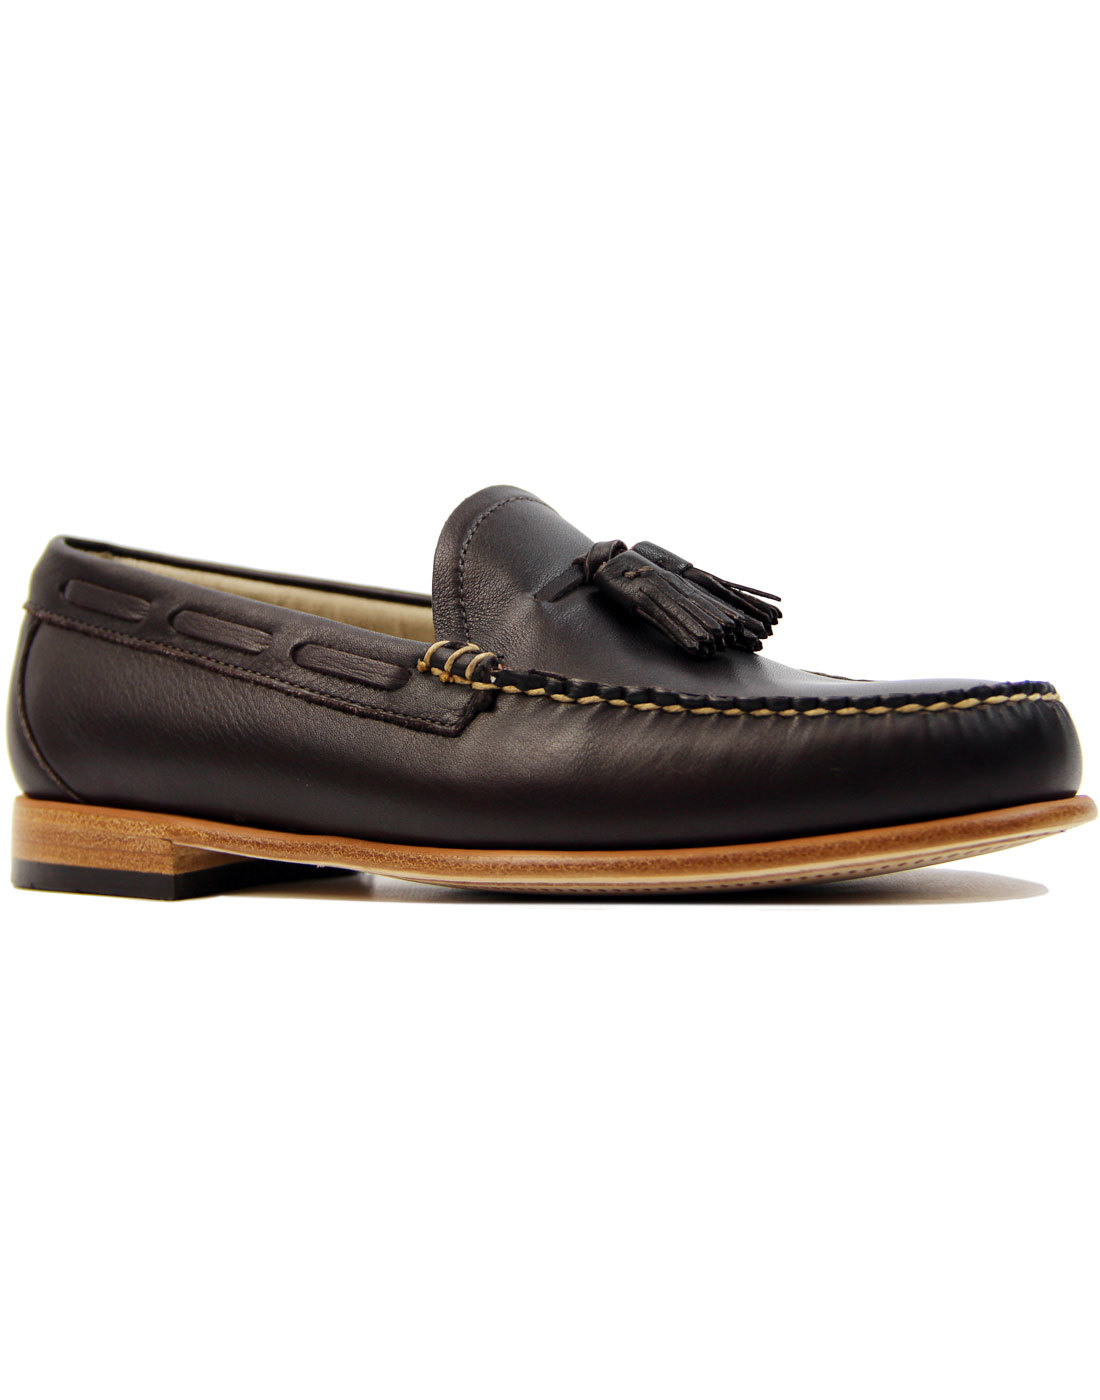 BASS WEEJUNS Palm Spring Larkin Retro Mod Leather Loafers Brown